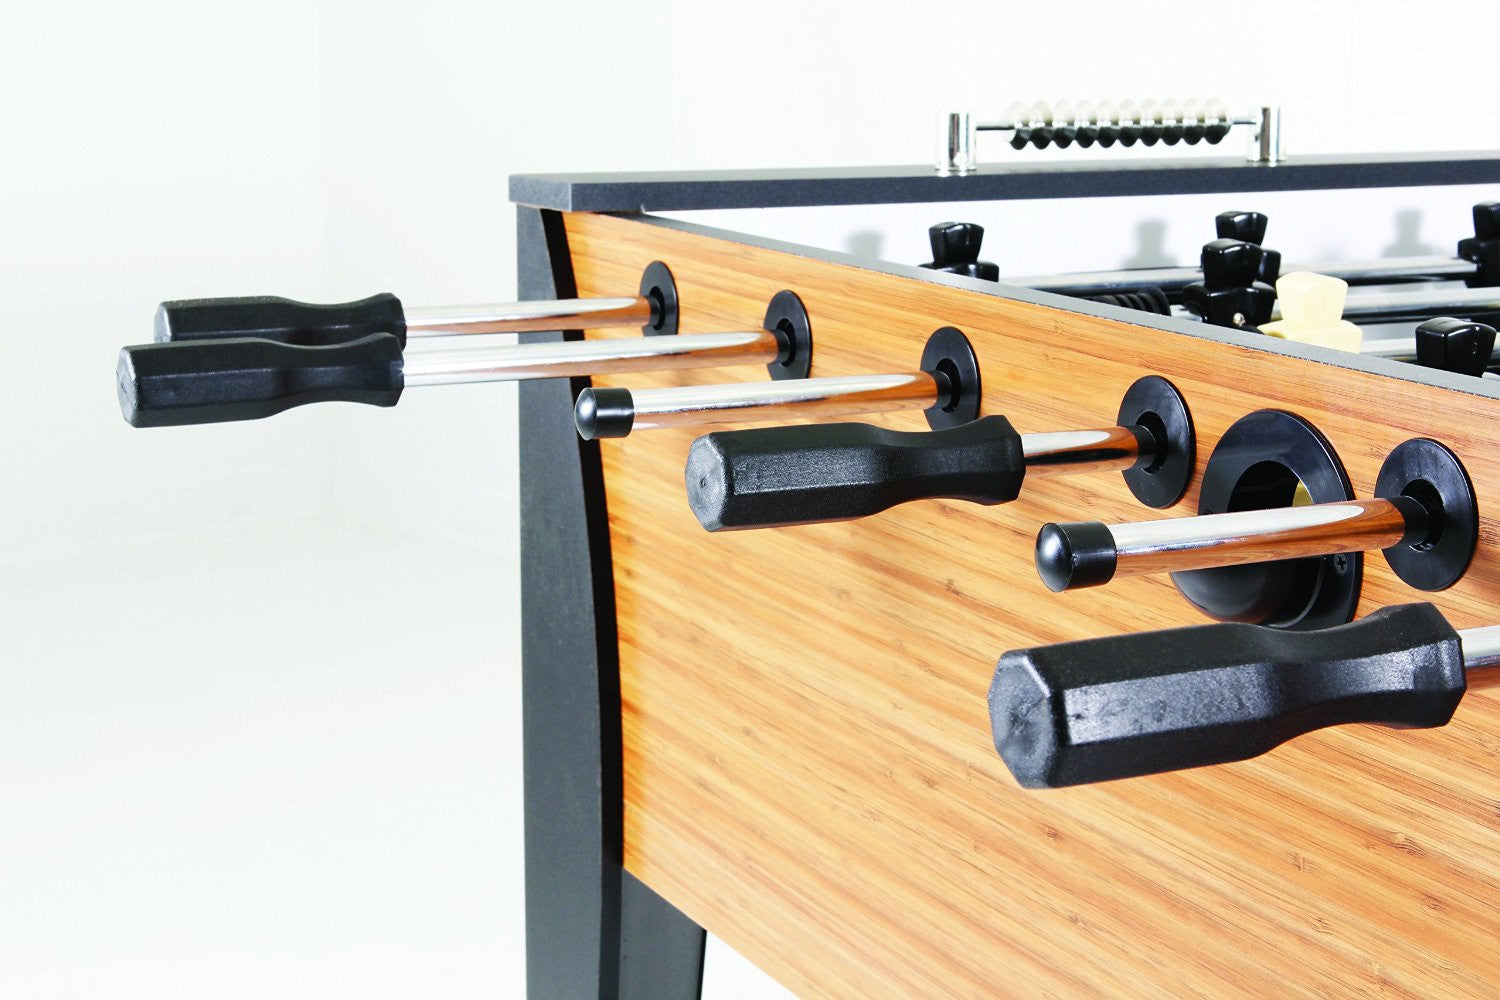 Handles of Pro Force Foosball Table from Atomic by DMI Sports available at Foosball Planet.